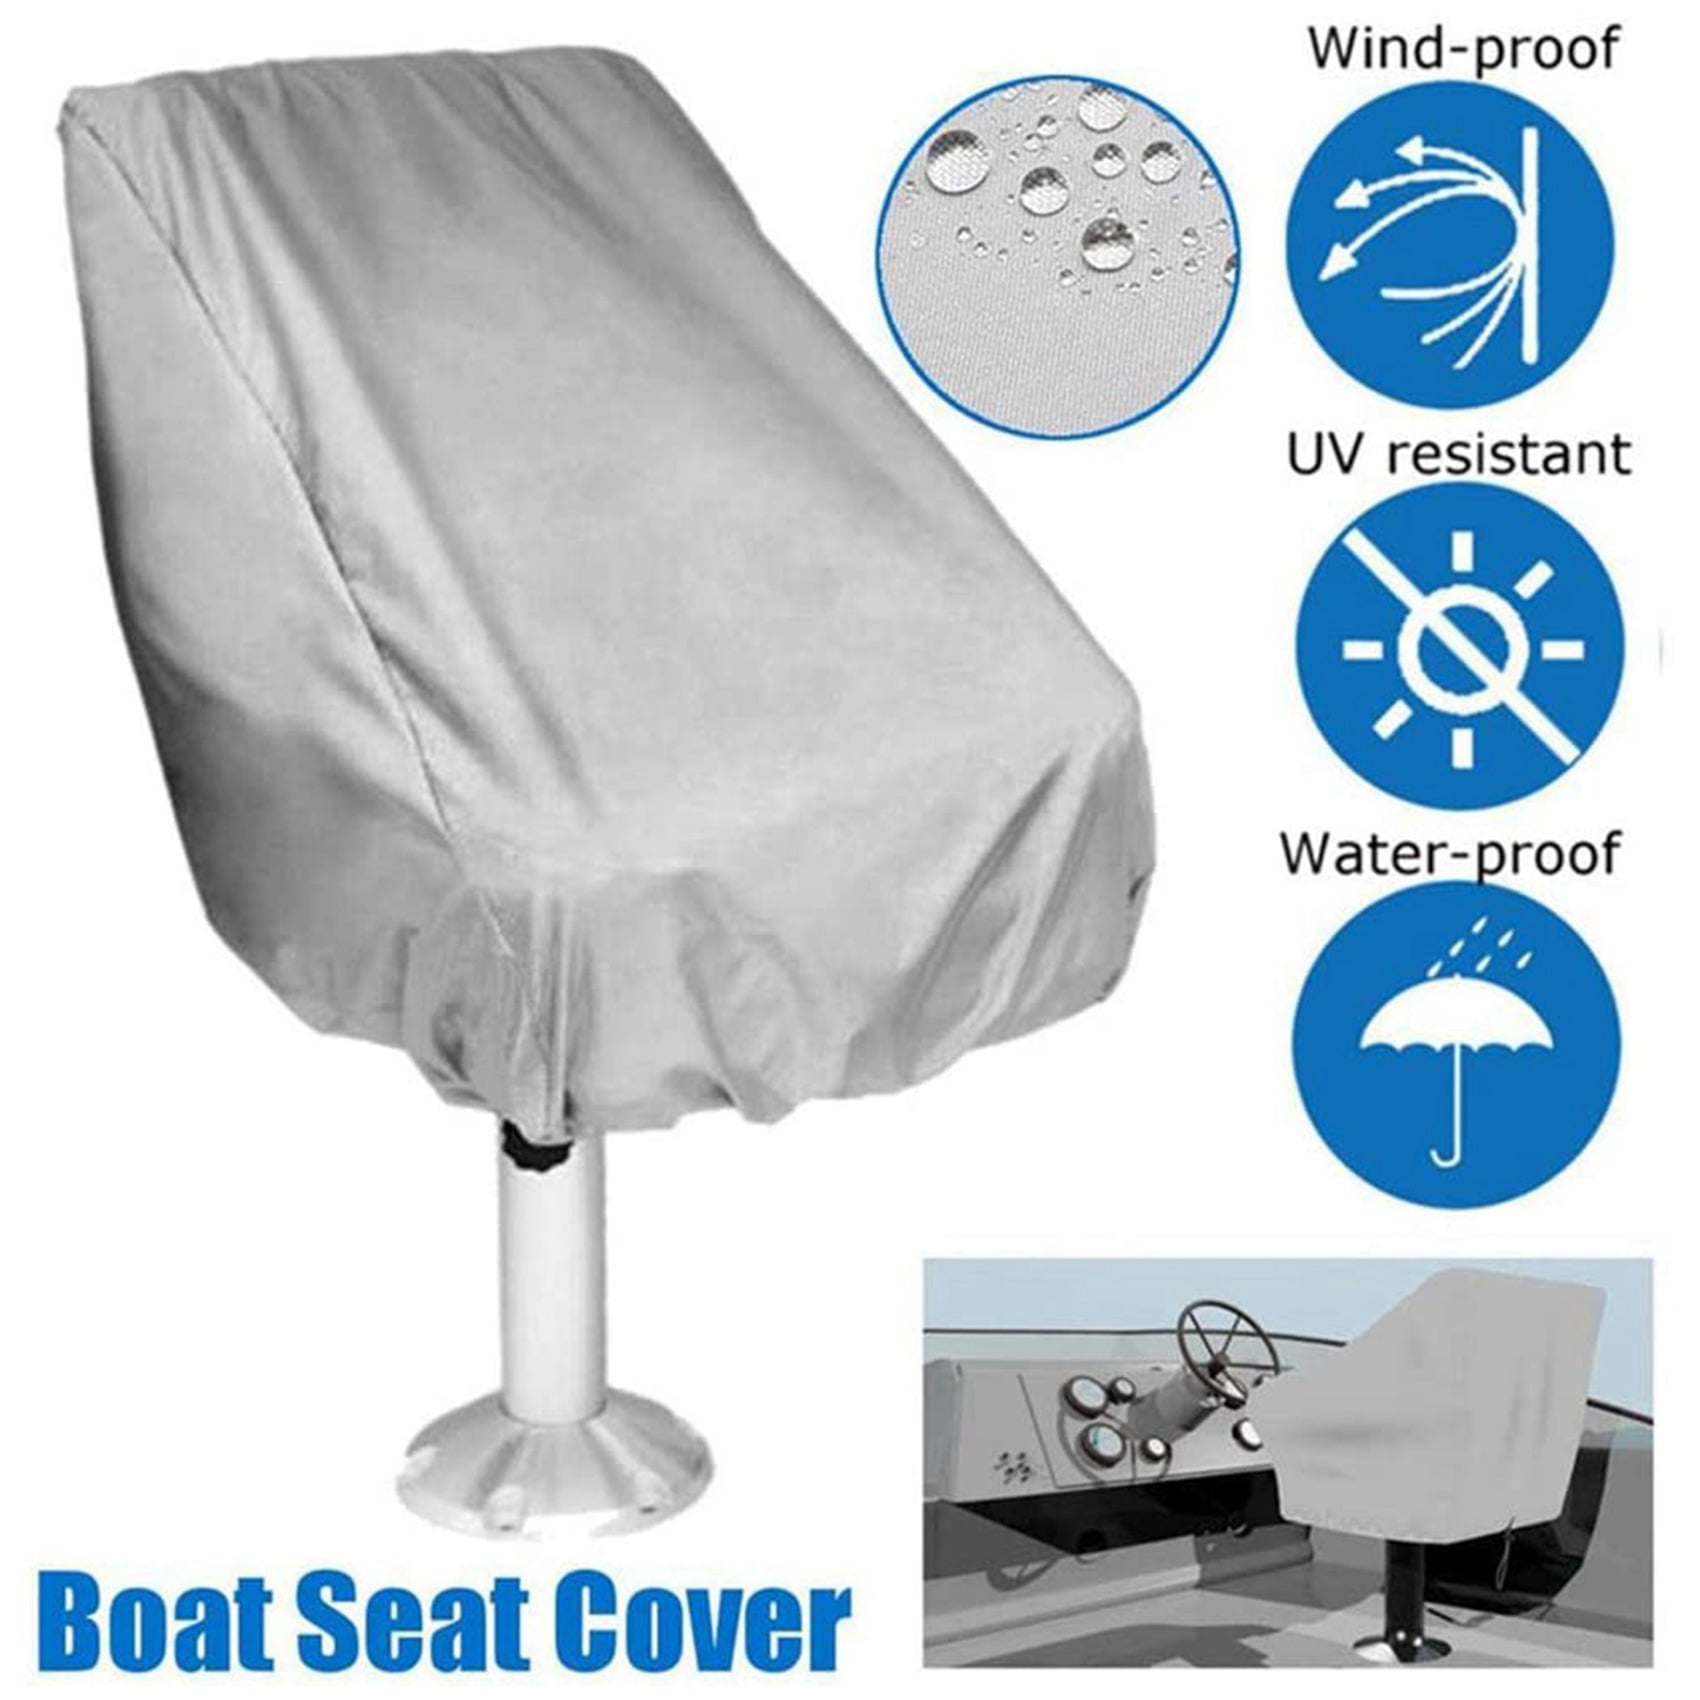 Black, 22x24x25 in/ 56×61×64 cm Boat Seat Cover Outdoor Waterproof Pontoon Boat Seats Covers Captain’s Chair Seat Cover All Season Protection 